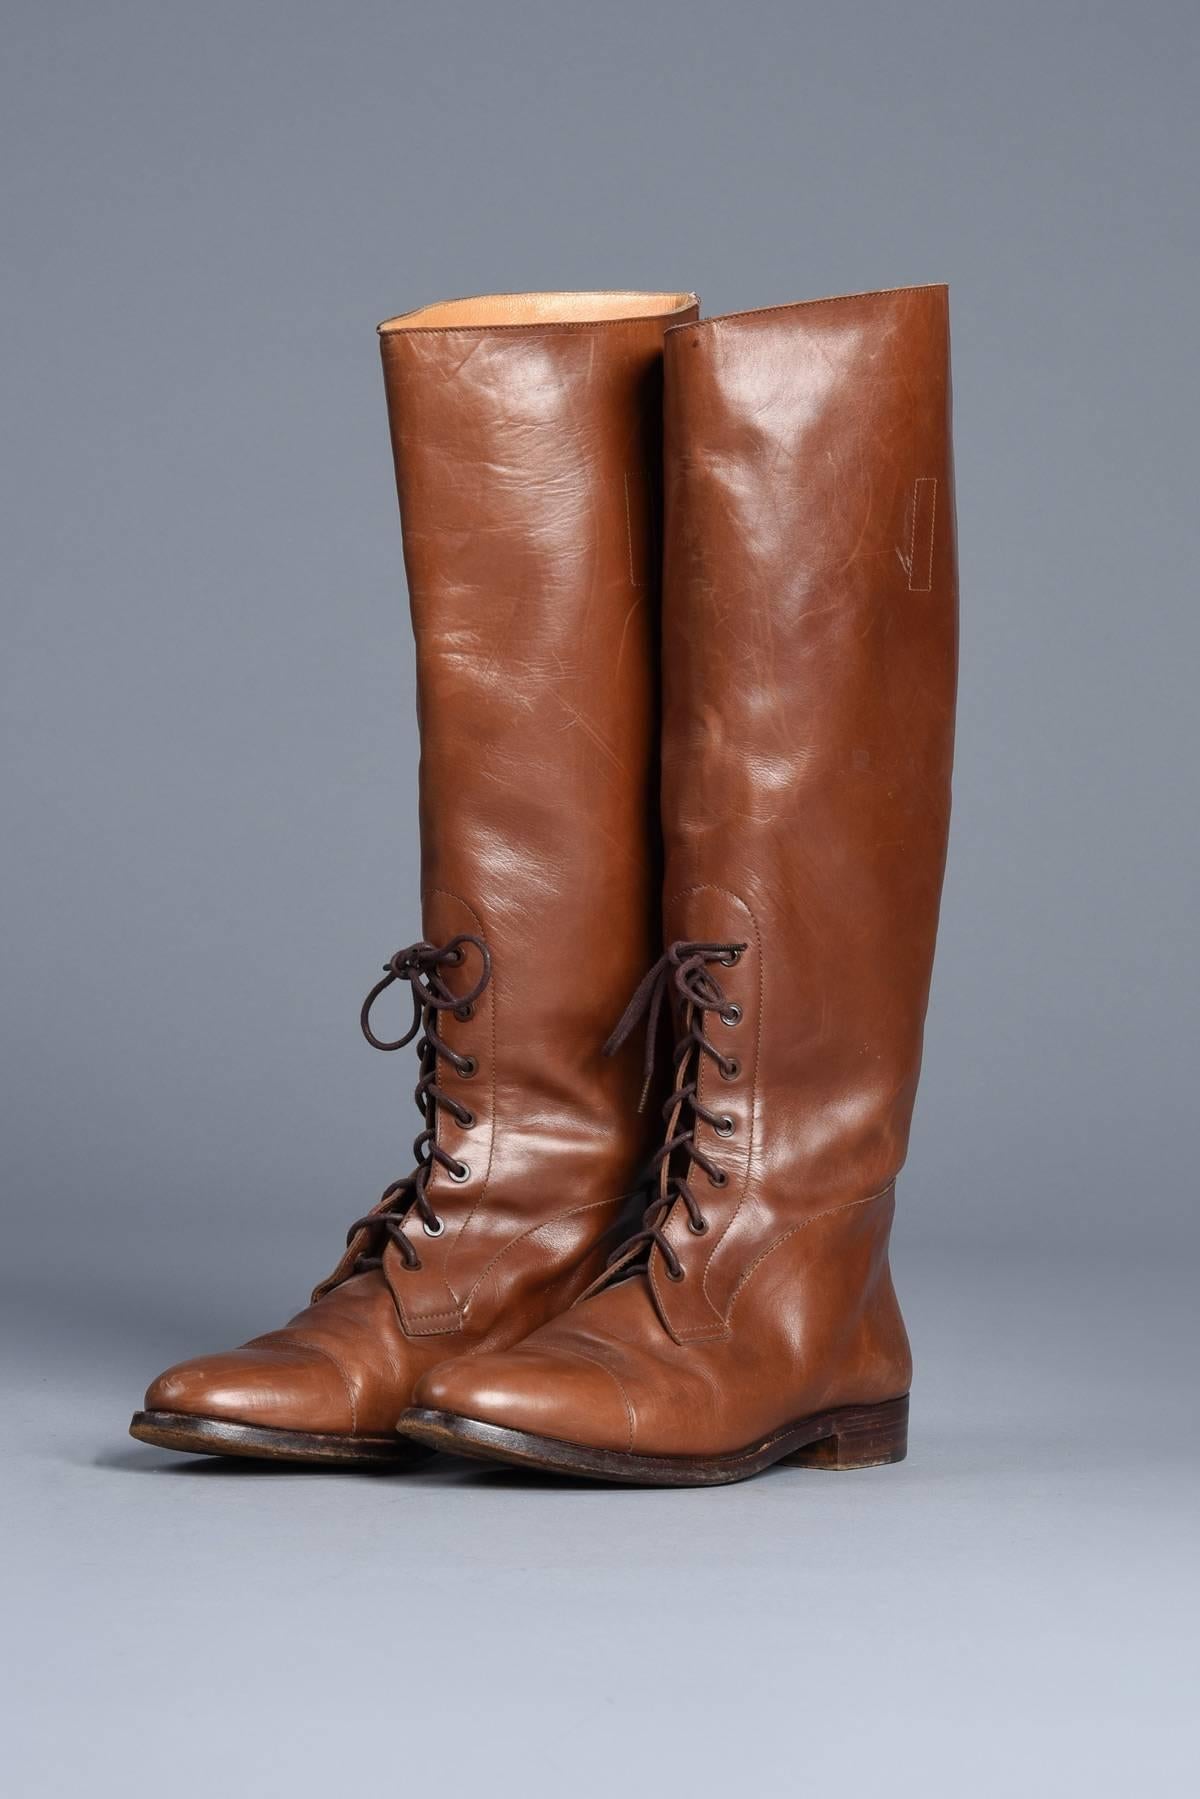 Absolutely beautiful Ralph Lauren leather equestrian boots. Gorgeous cognac leather with lace up front. All leather inside and leather soles. Also includes the original cotton evergreen dust bags with leather tassel drawstring closure. 

Marked US